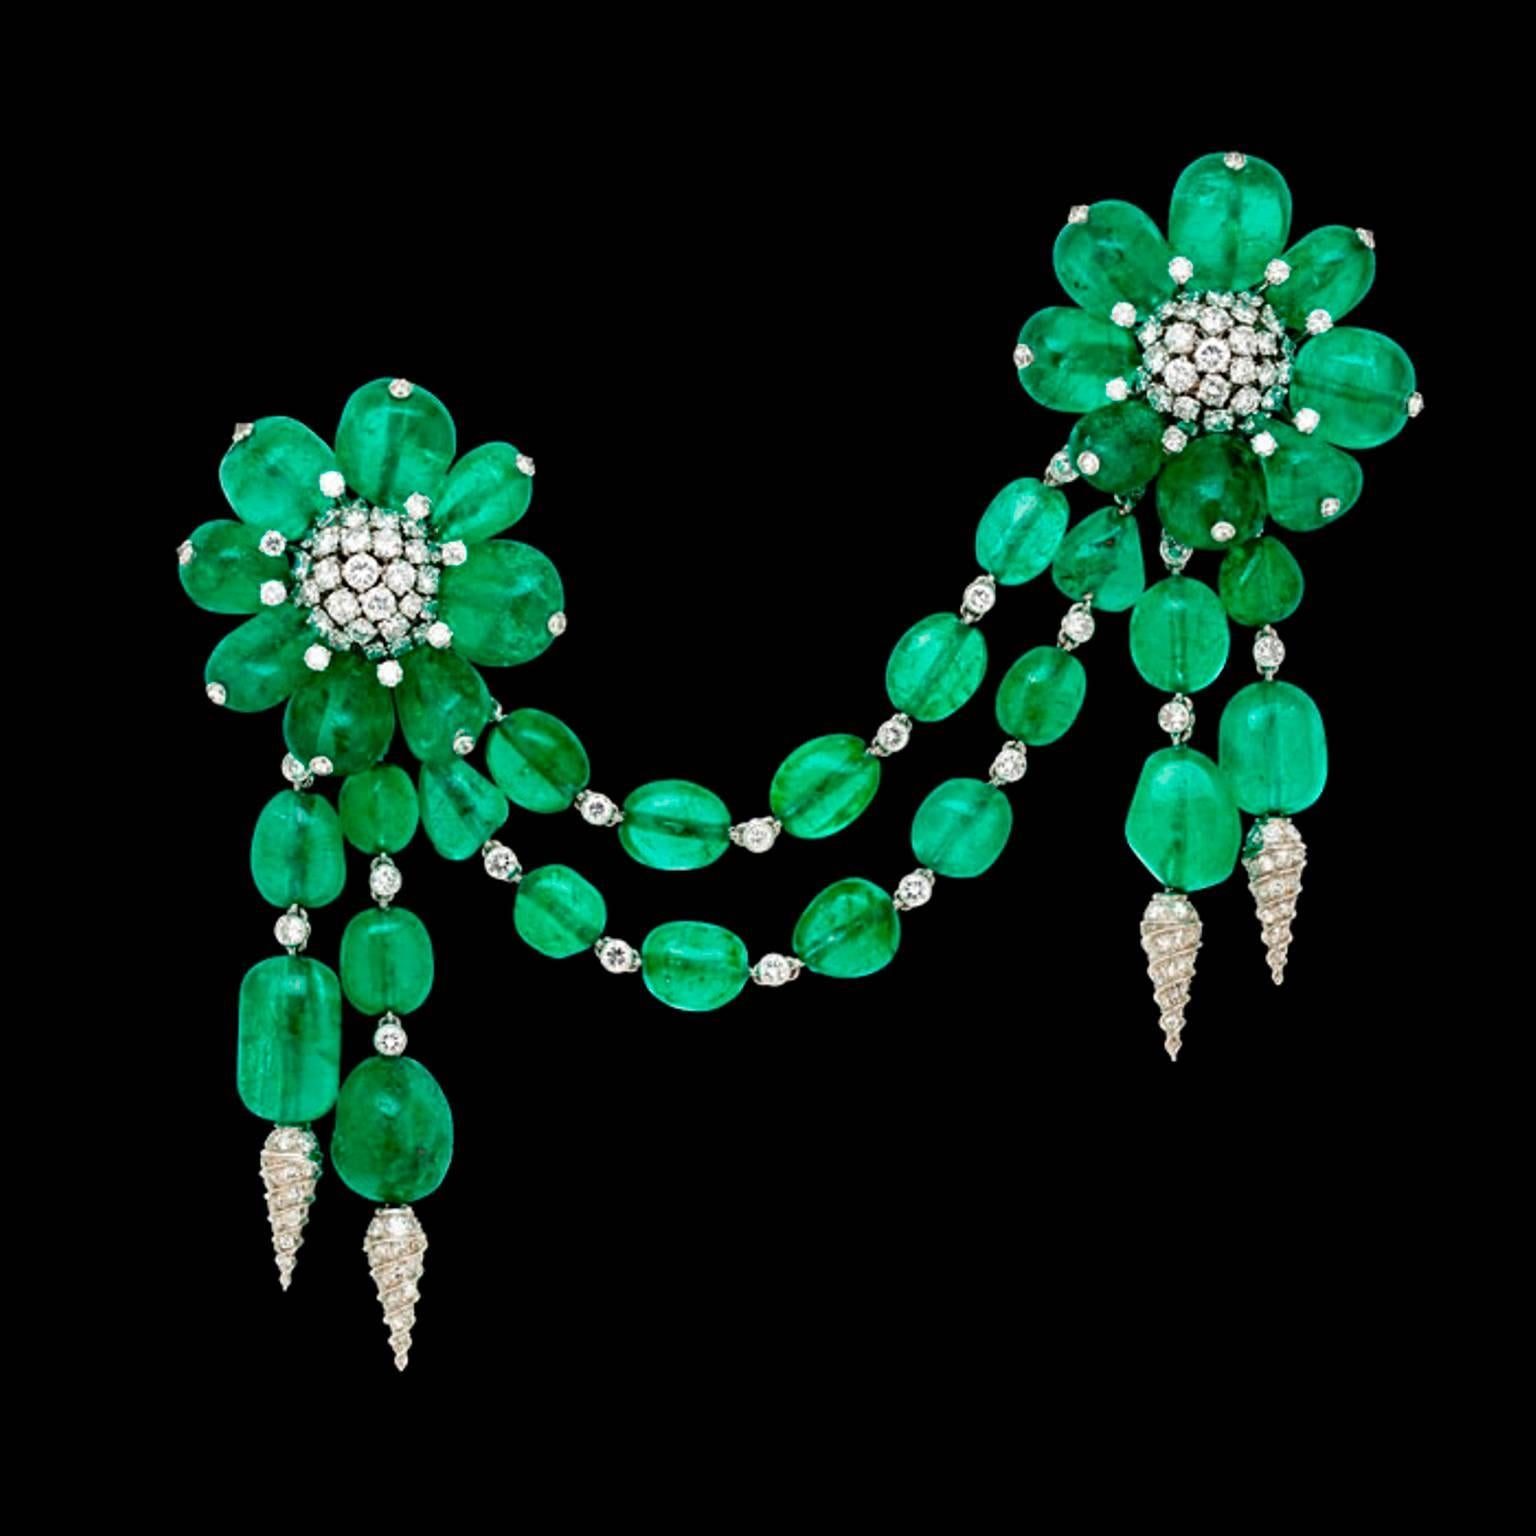 The devant de corsage designed as two flower heads each with polished emerald bead petals surmounted by a single diamond detail surrounding a round brilliant-cut diamond cluster centre, linked by a double row of emerald beads interspersed with bezel